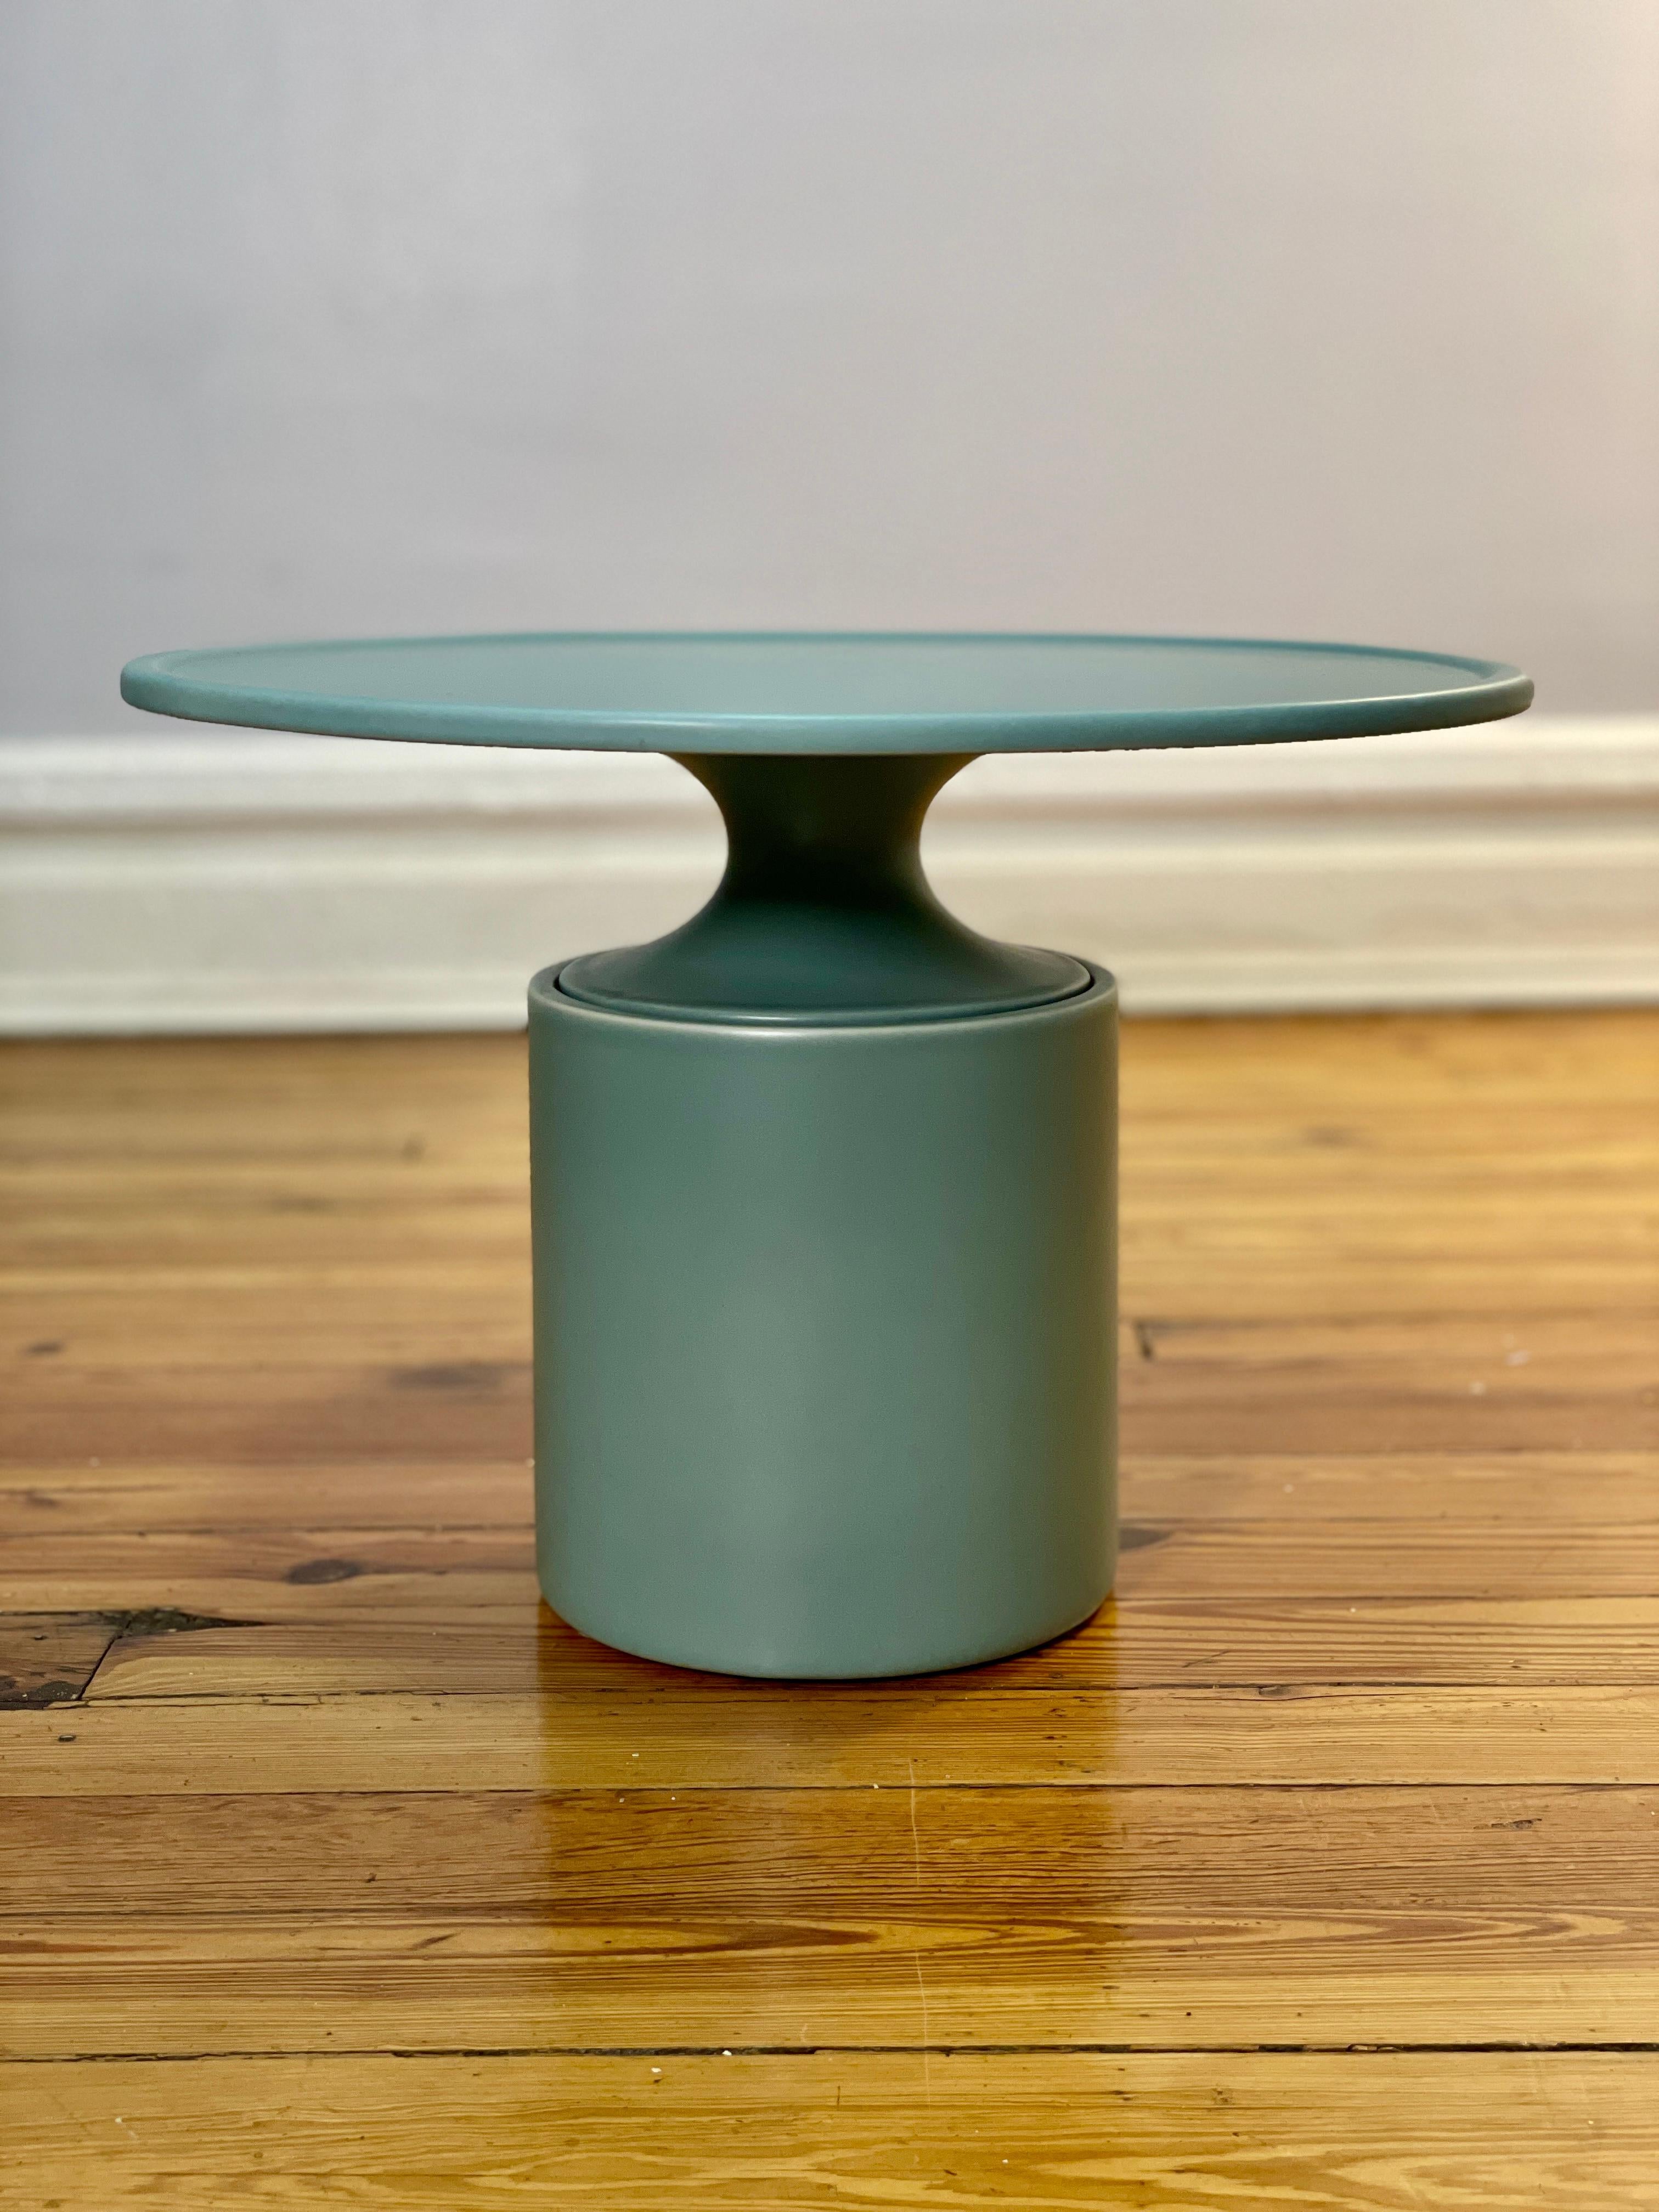 This contemporary side table is part of the Delcourt Collection. Edition by Christophe Delcourt and design by Vincent Dupont-Rougier.  Made in ceramic and beautifully glazed with a nice blue tone. This is the smaller model of the OUK side table. A